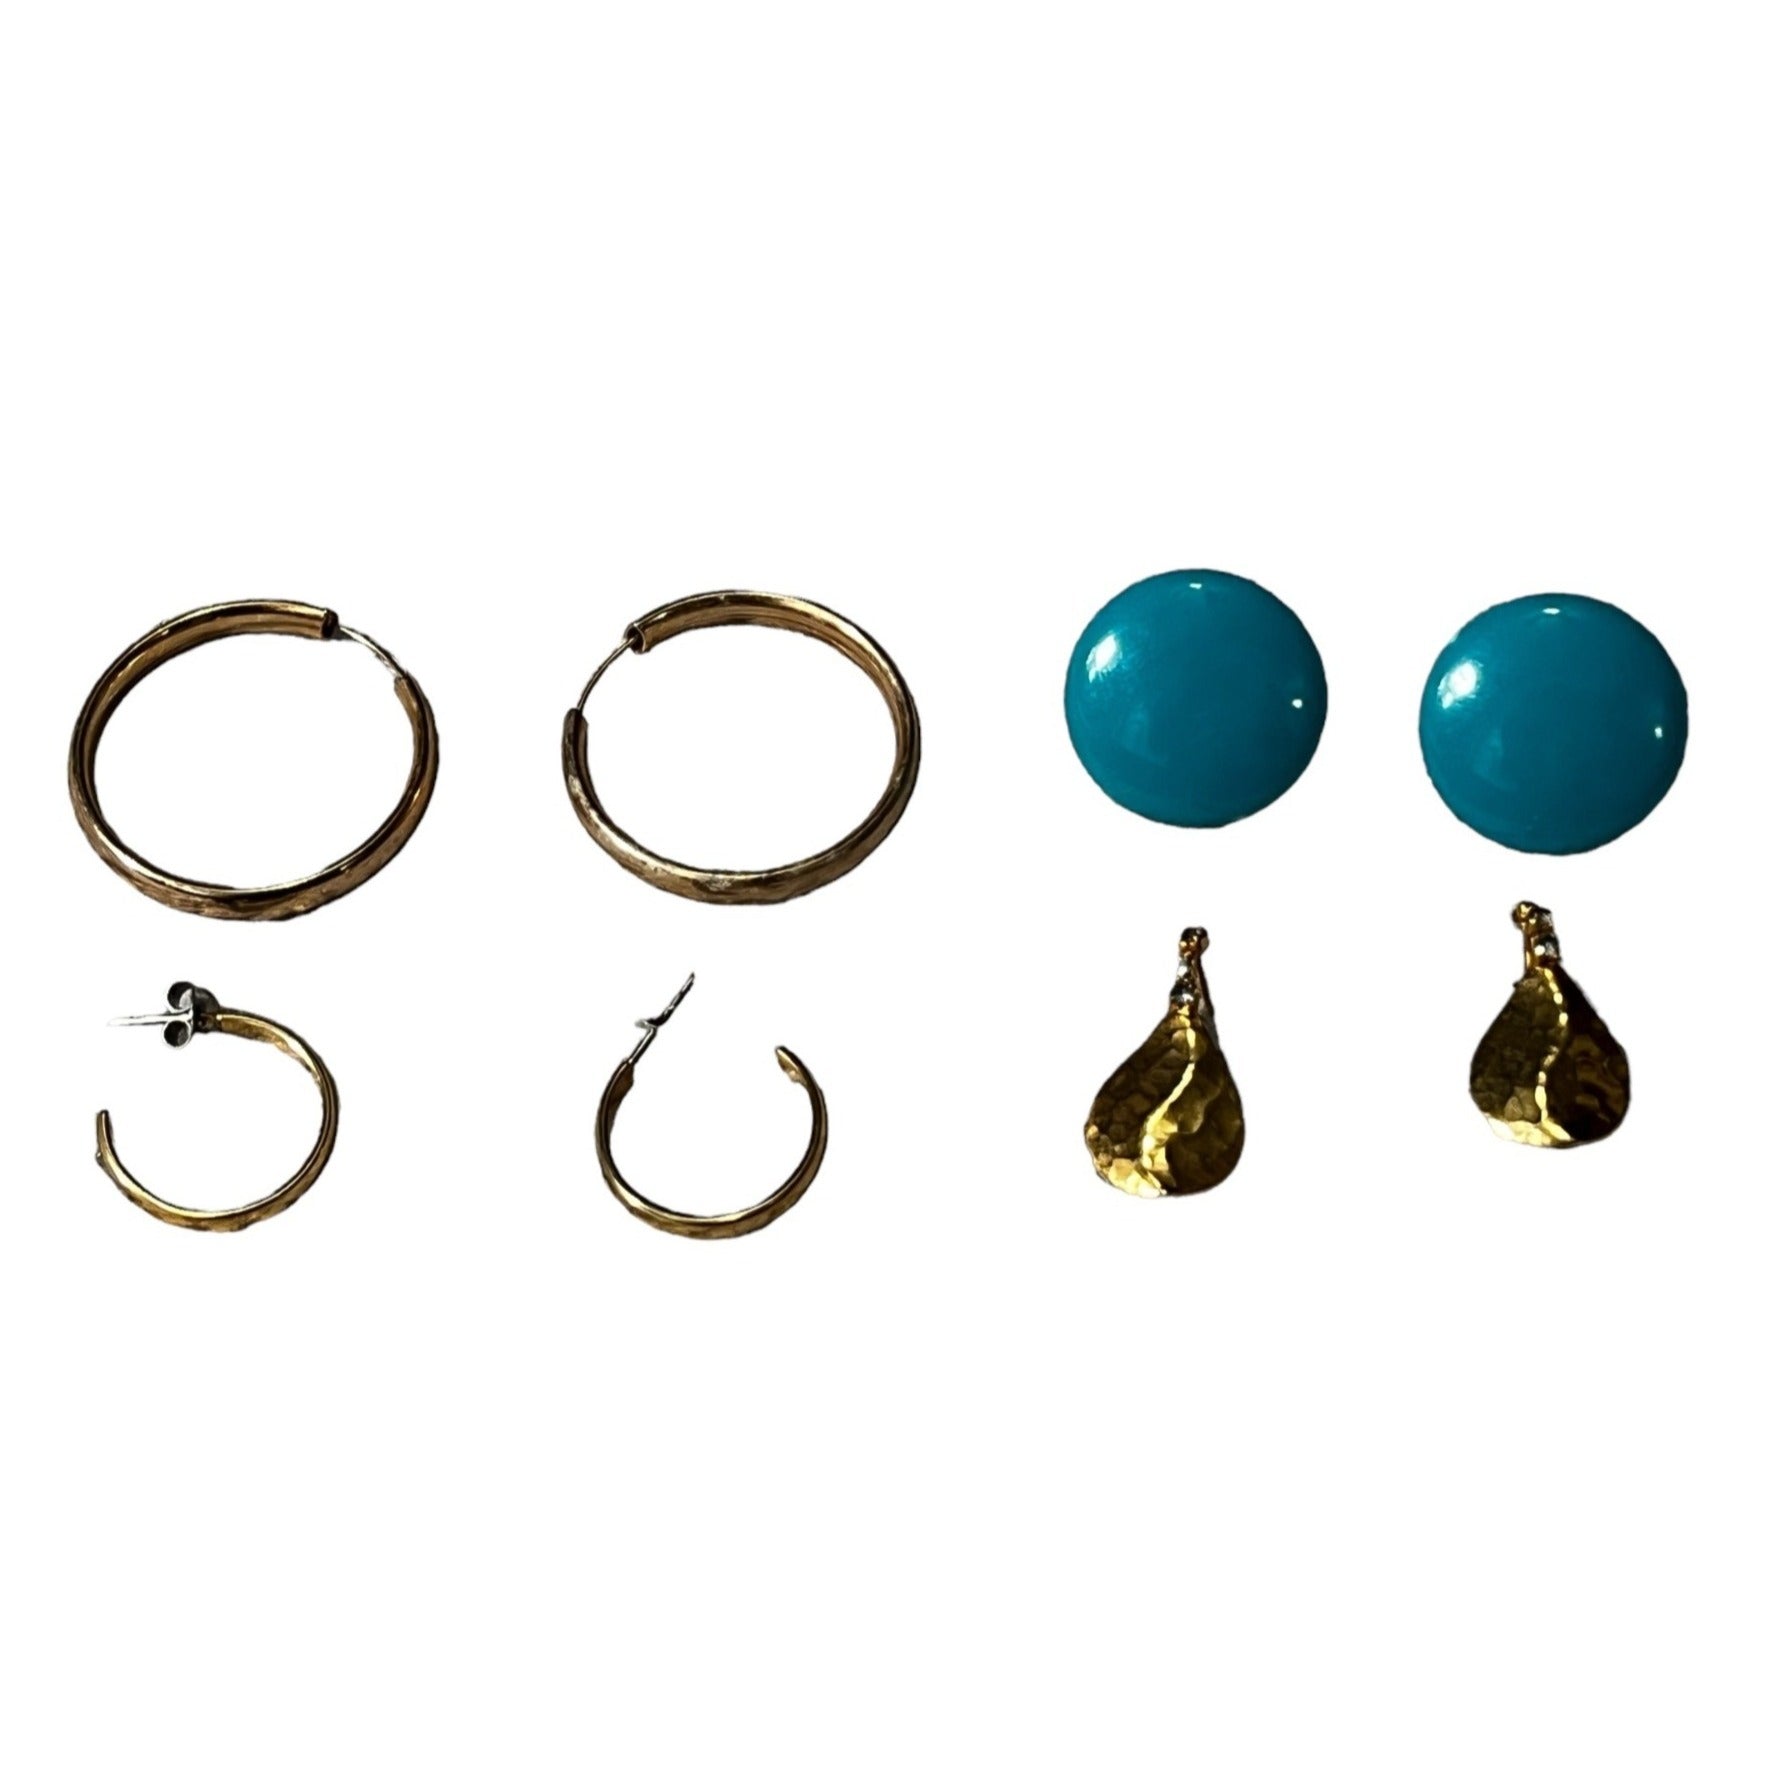 Bundle of 4 Pairs of Assorted Earrings Gold Hoops Tear Drops and Teal Studs